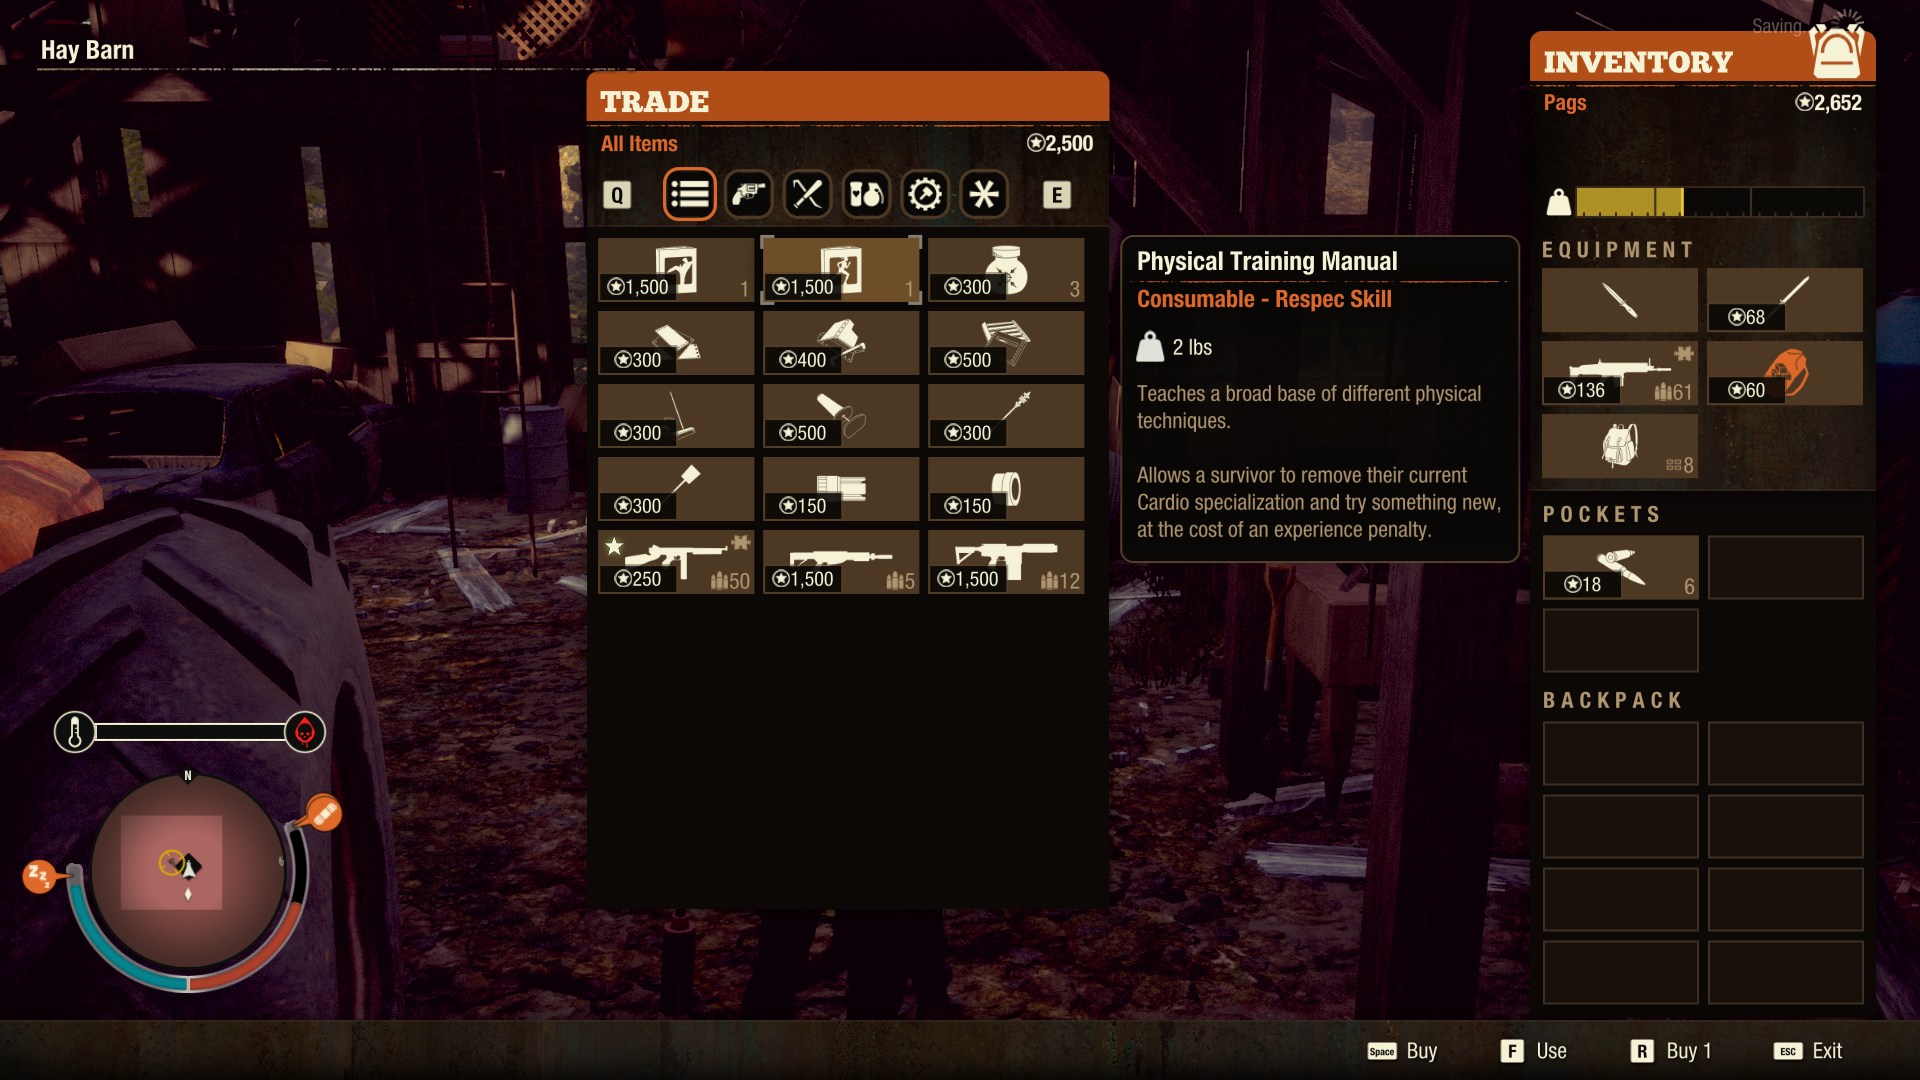 State of Decay 2 Trainer, Page 12